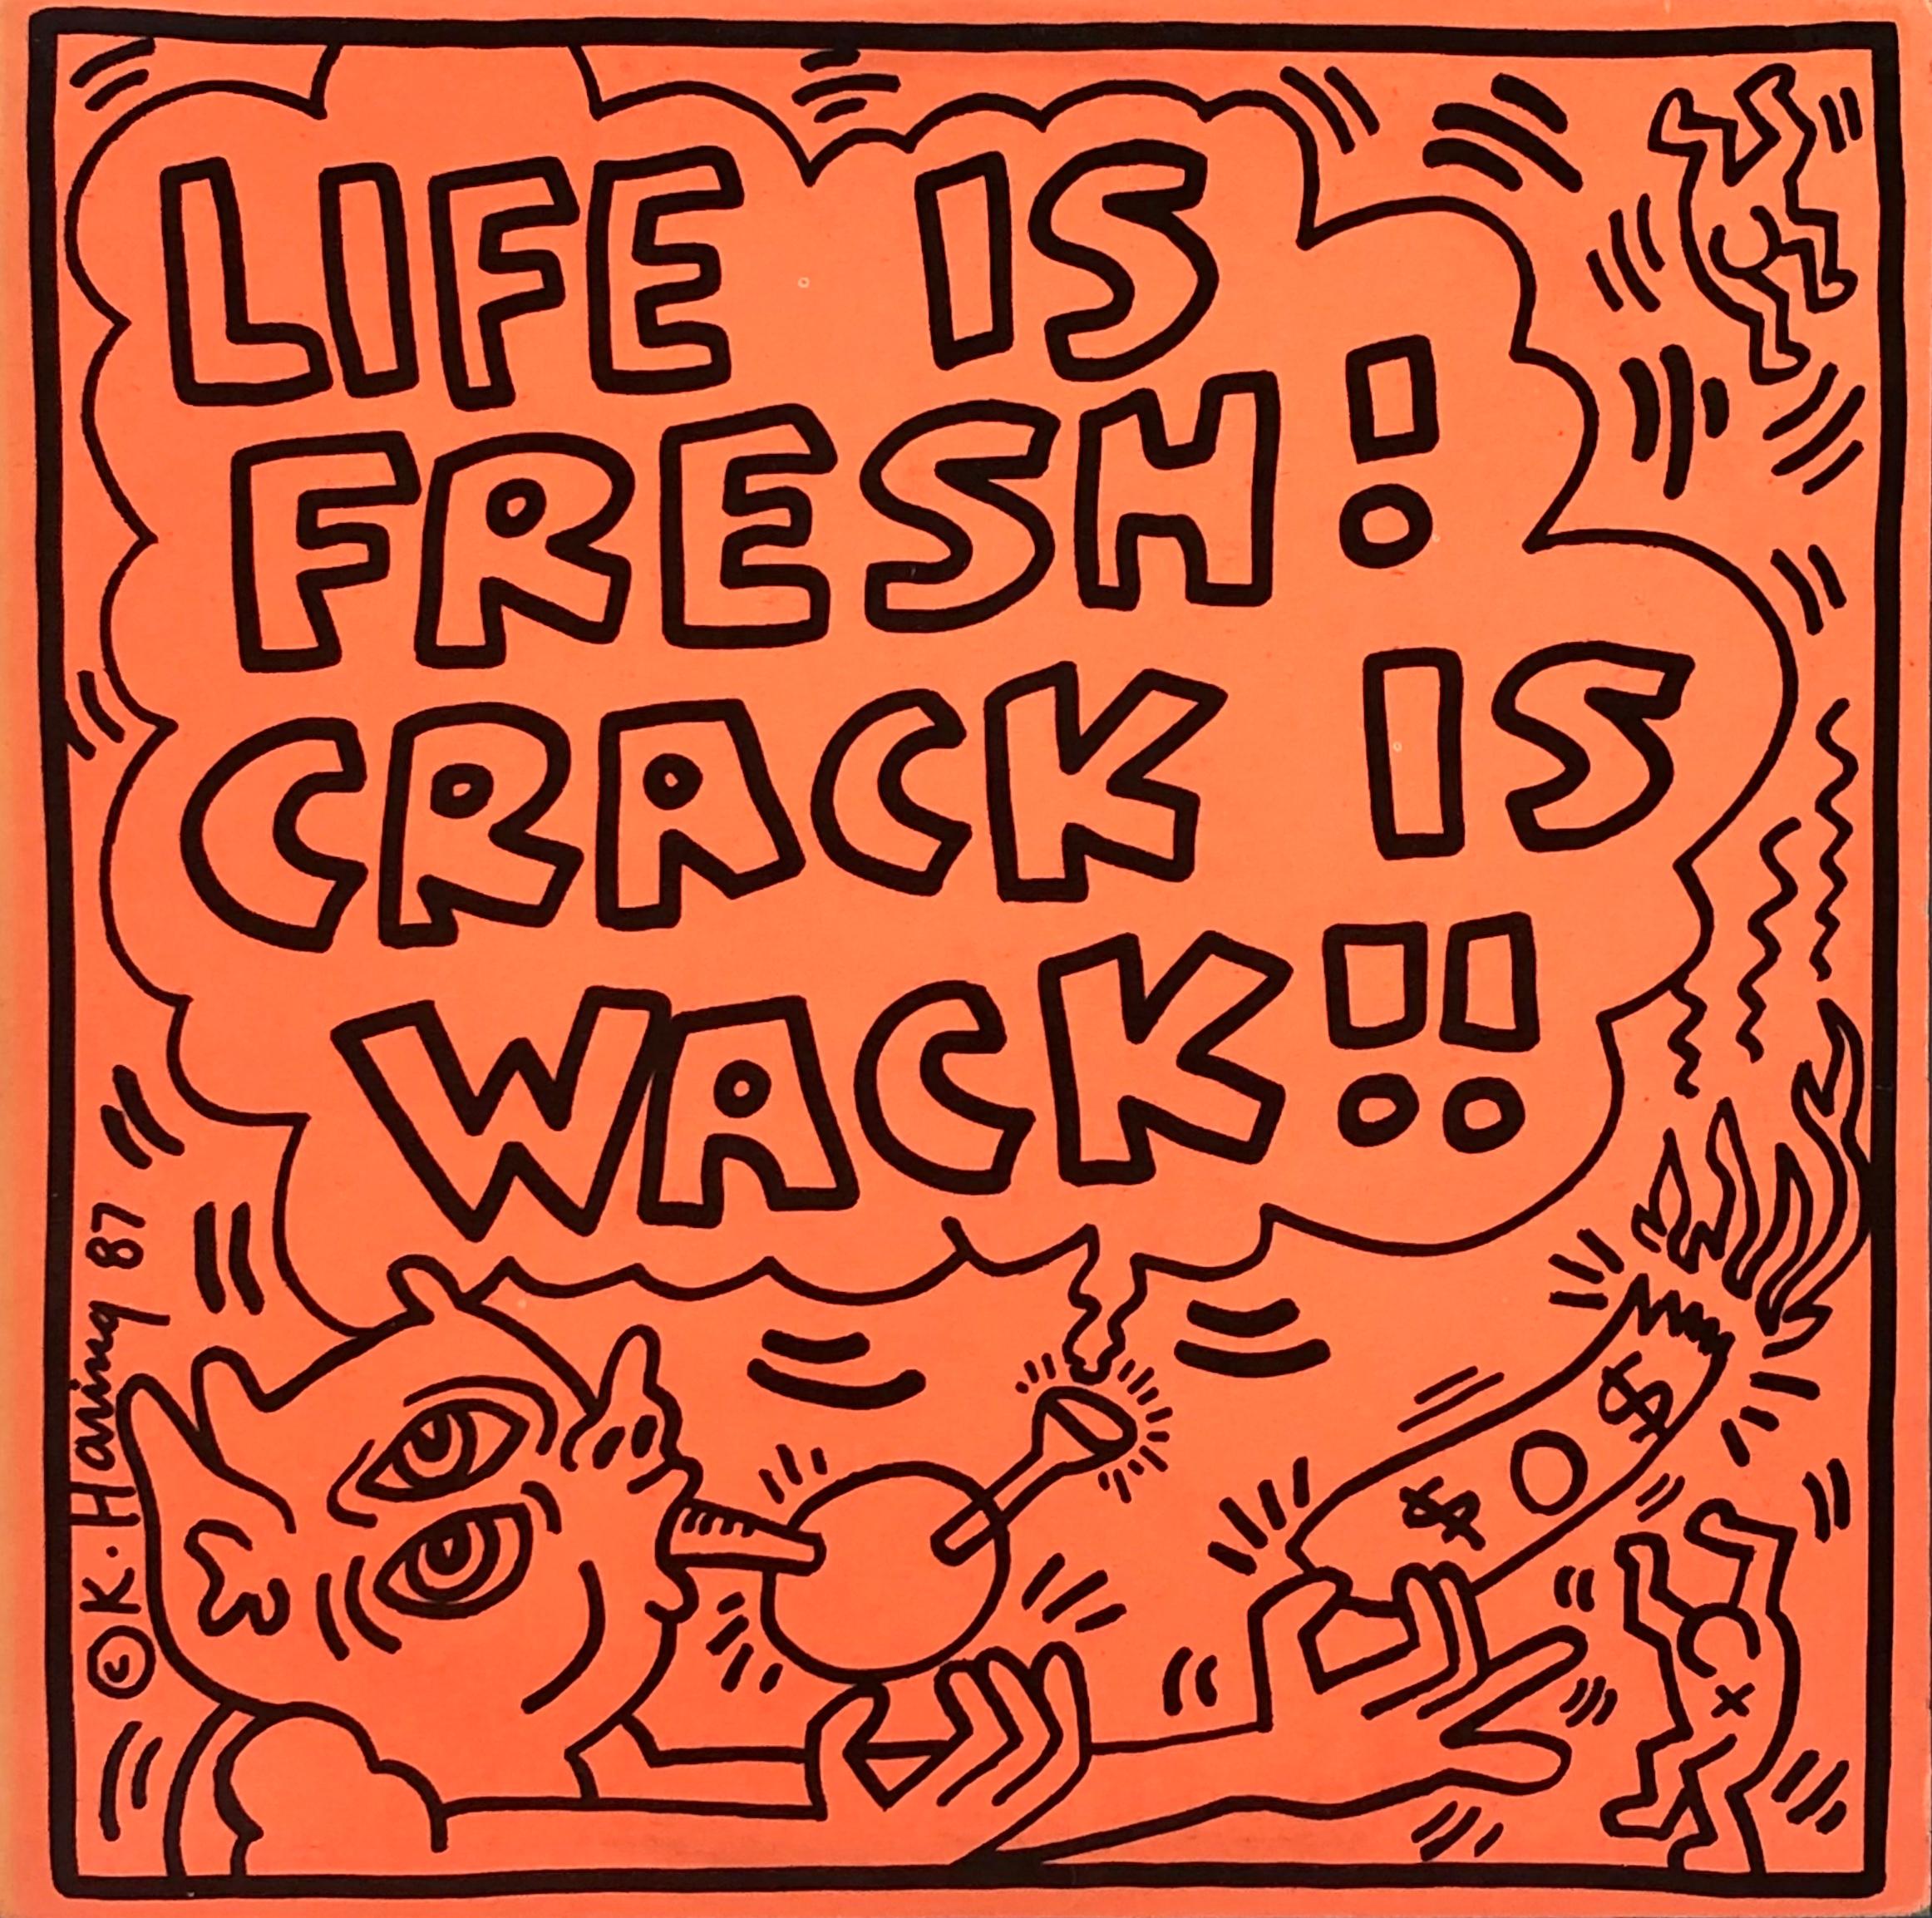 Rare Keith Haring “Life is Fresh! Crack Is Wack!” 1987:
A highly sought-after 1980s record album featuring original artwork by Keith Haring. Among the most difficult to find of Keith Haring record illustrations. 

Haring's cover illustration here